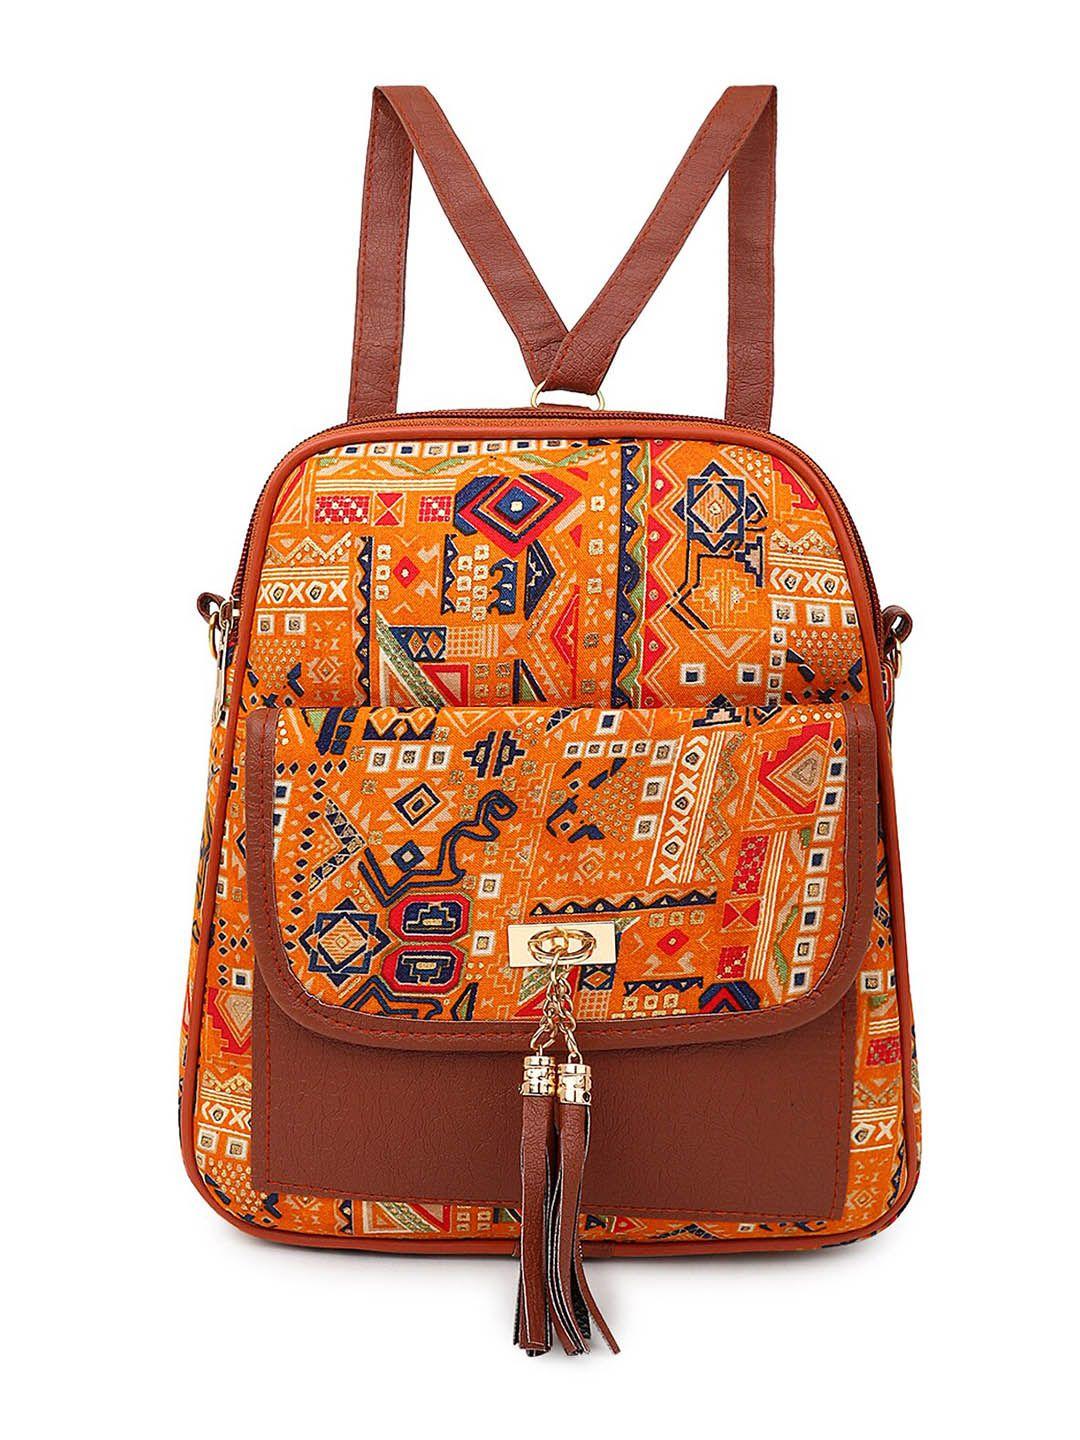 dn creation abstract printed backpack